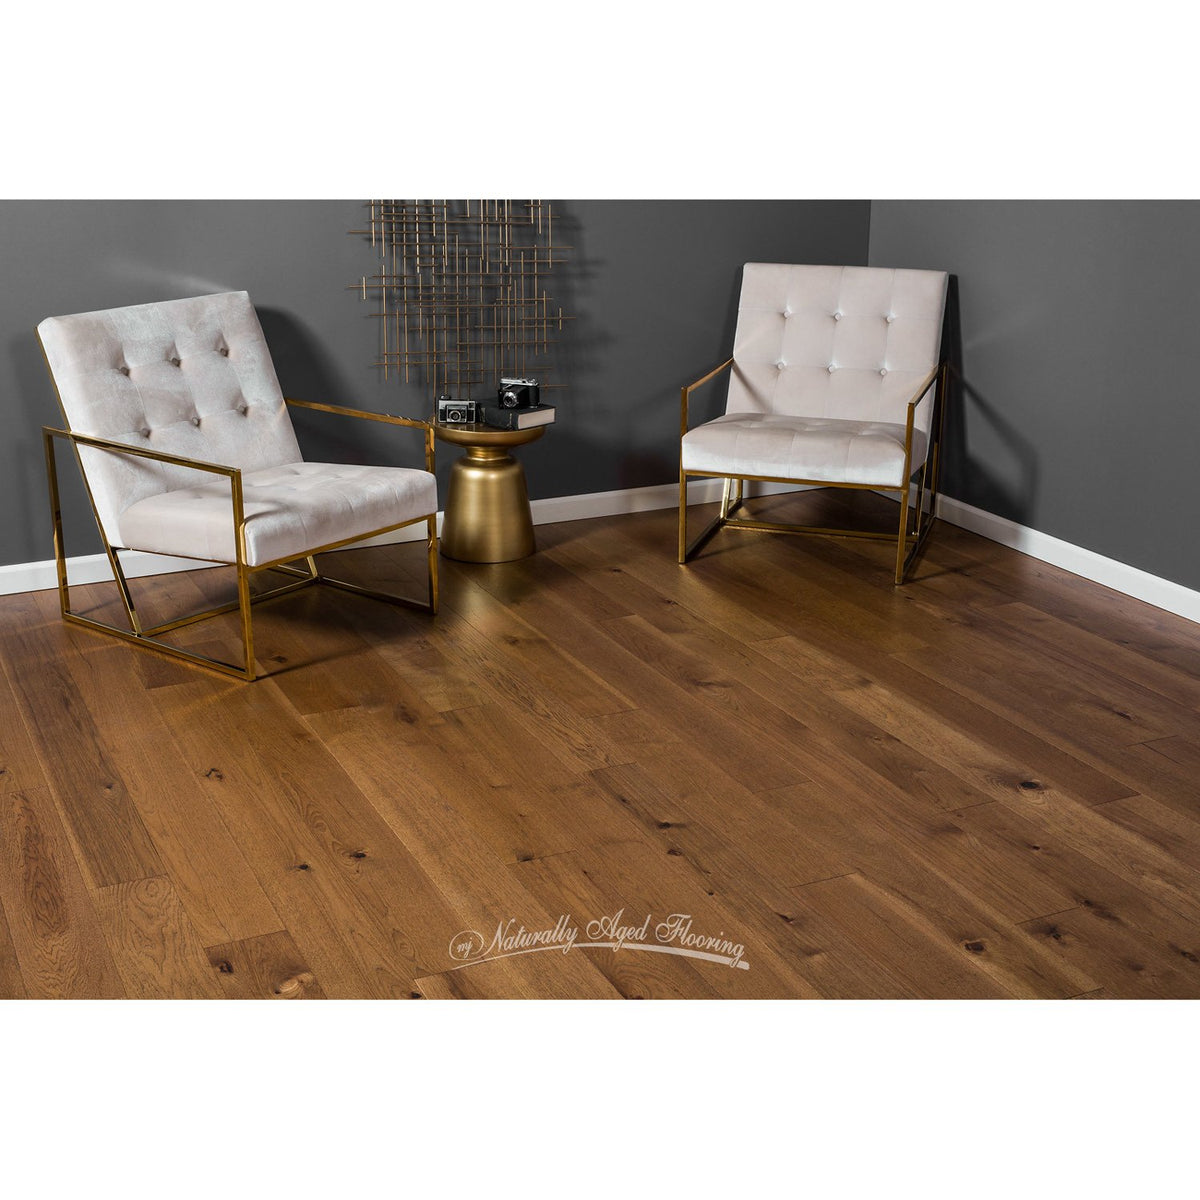 Naturally Aged Flooring - Royal Collection- Wire Brushed Hickory Engineered Hardwood - Timberland